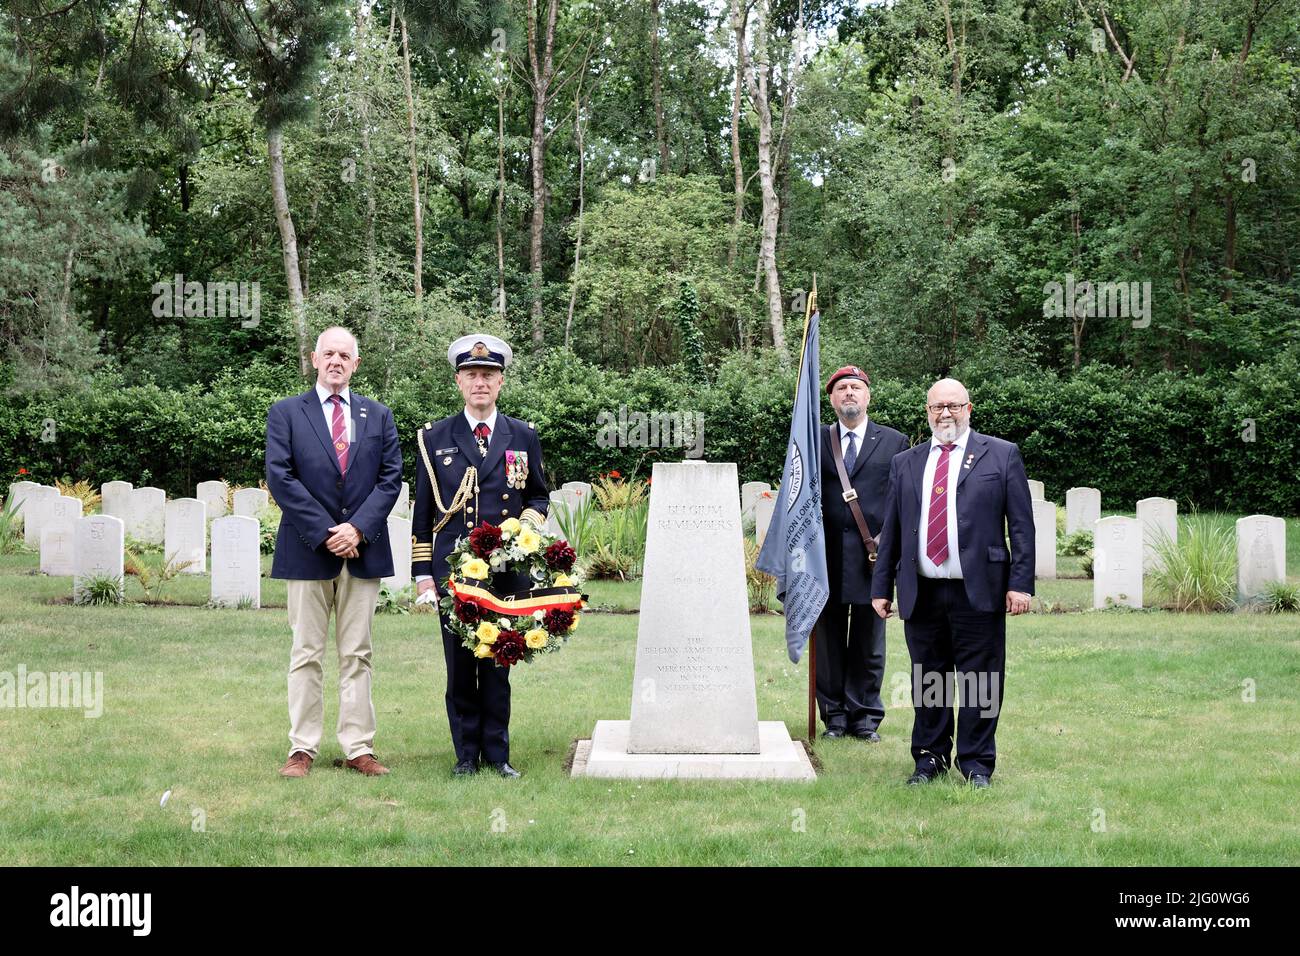 Sun 3rd July 22.At the the Belgian War Memorial Brookwood Military Cemetery with Belgian war graves in the background L to R: Paul McCue, author & military historian; Captain (Naval) Renaud Flamant Defence Attaché of the   Embassy of the Belgian Kingdom in the UK holding his Ambassadors wreath; Edward Jones, Artist Rifles Standard Bearer and Kevin Davis, Chair of the Brookwood Last Post Association. Stock Photo